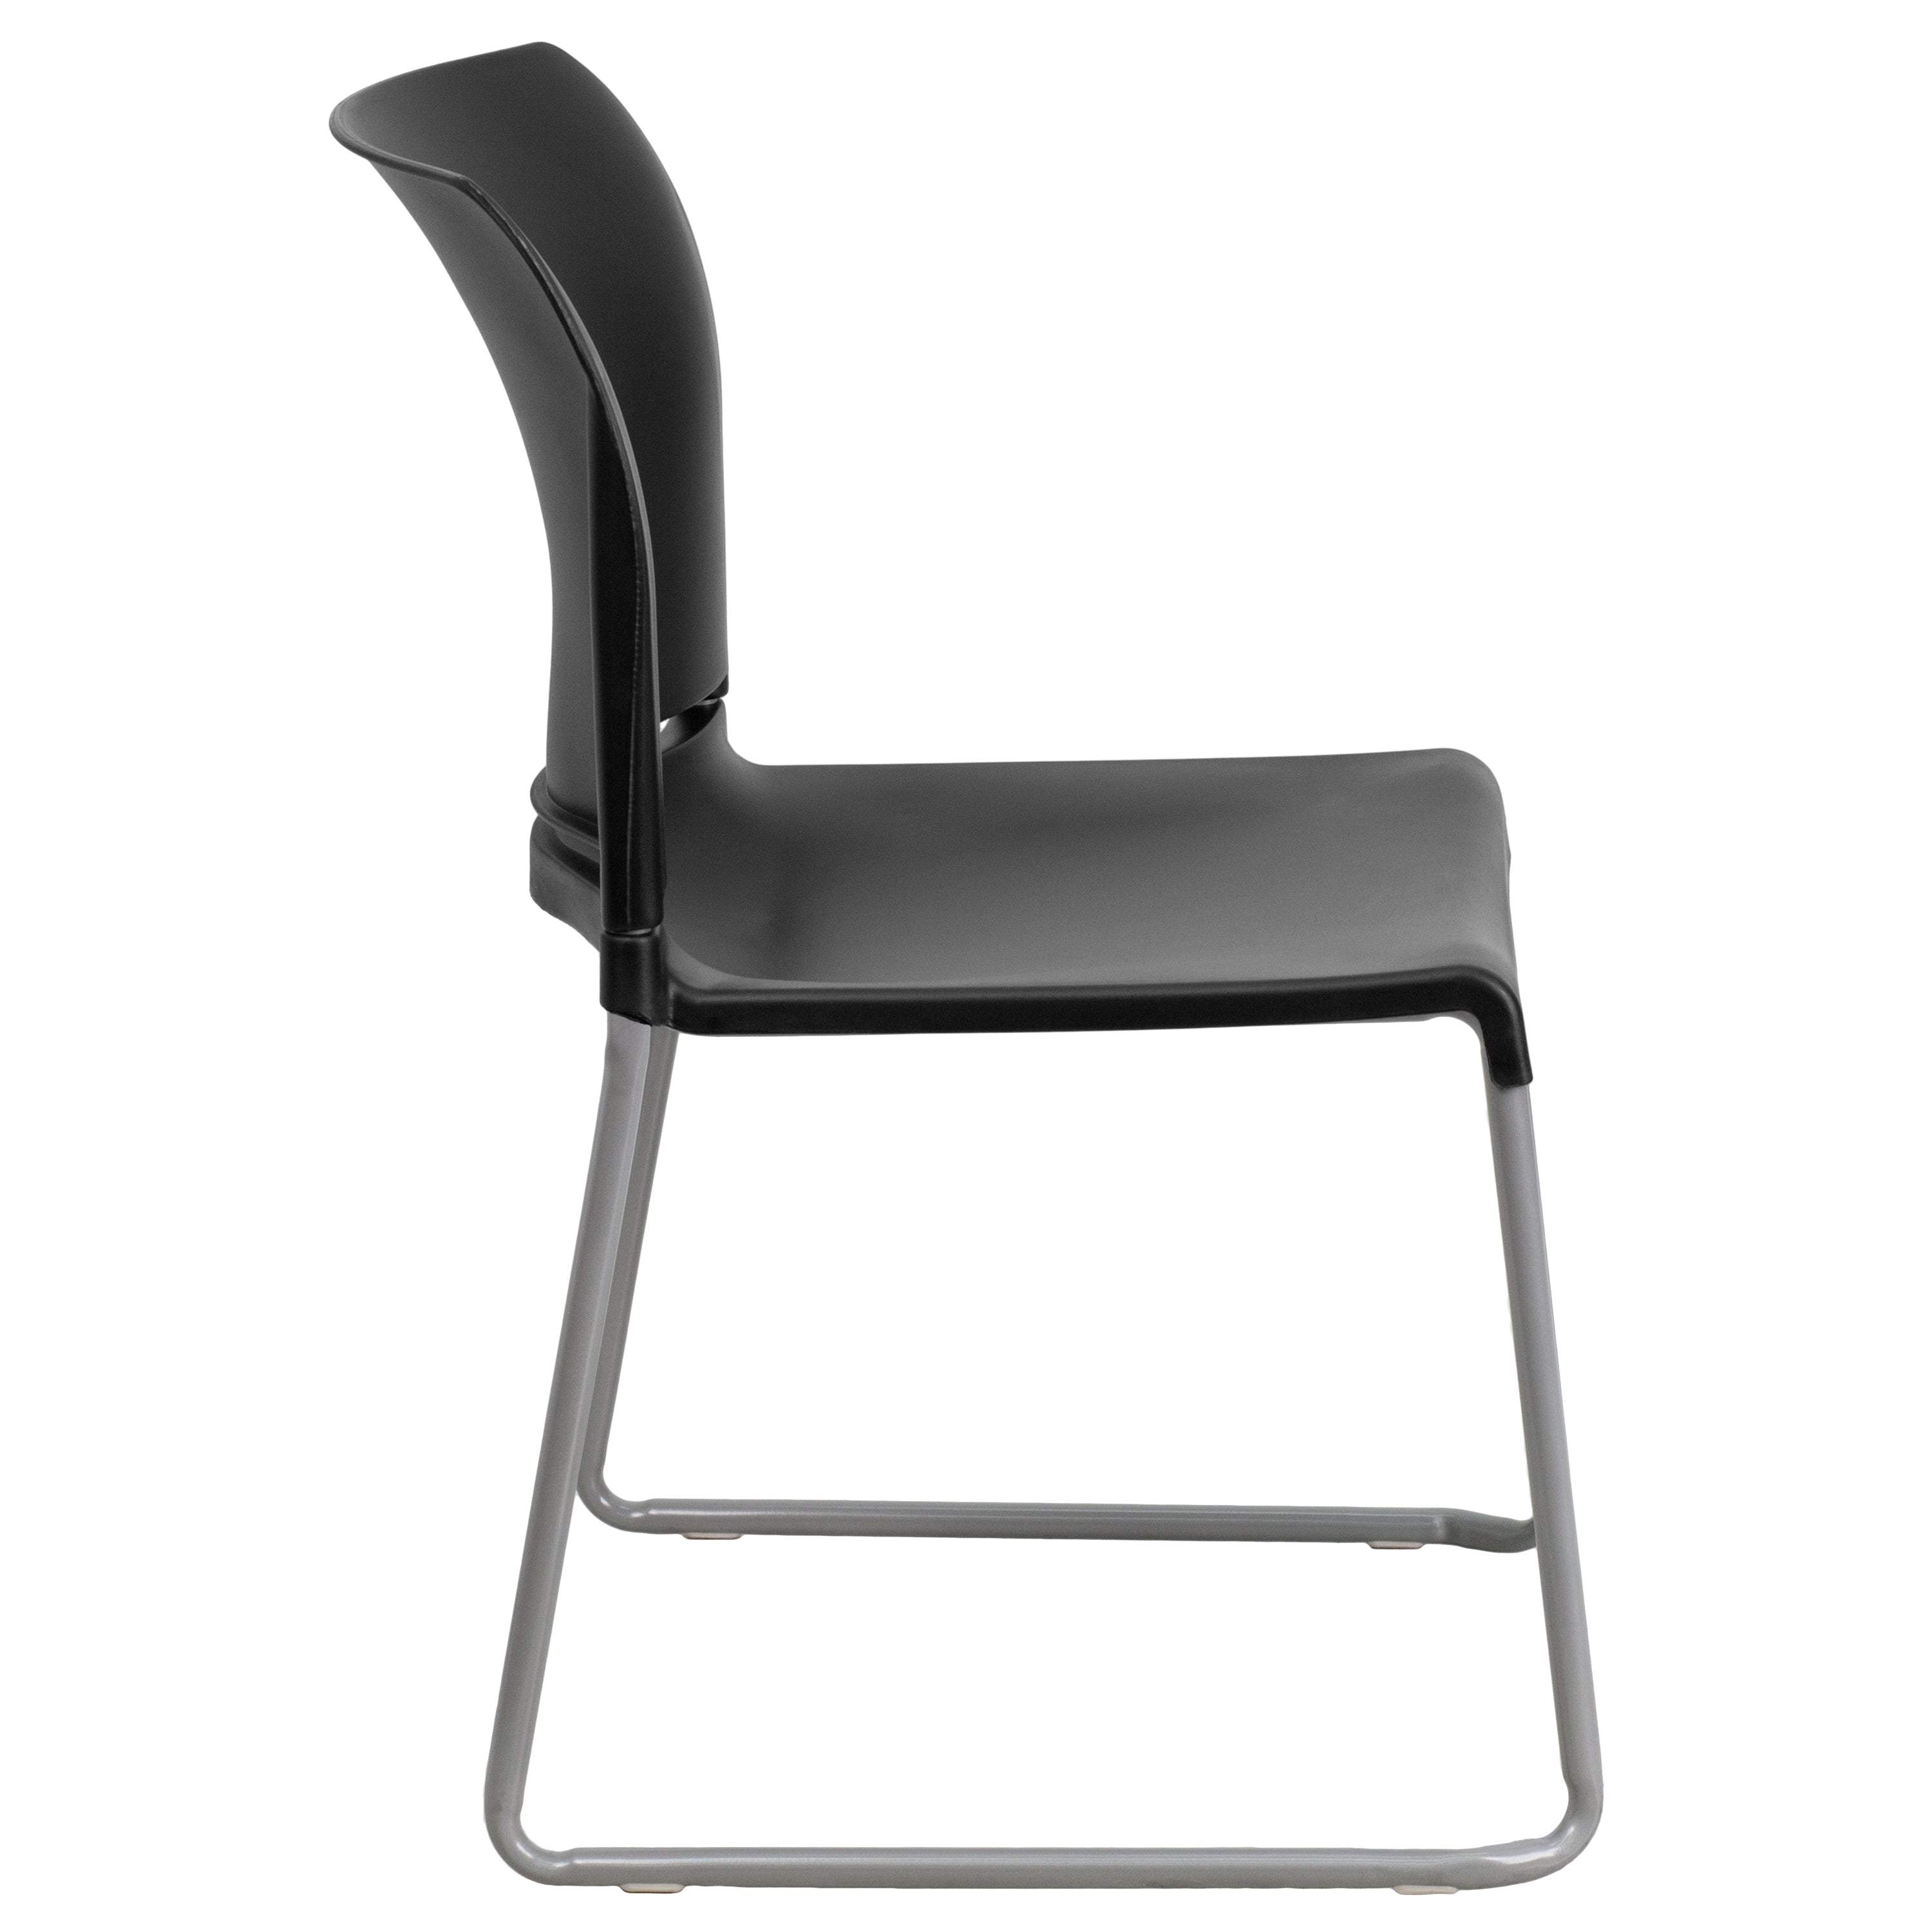 HERCULES Series 880 lb. Capacity Full Back Contoured Stack Chair with Powder Coated Sled Base-Plastic Stack Chair-Flash Furniture-Wall2Wall Furnishings